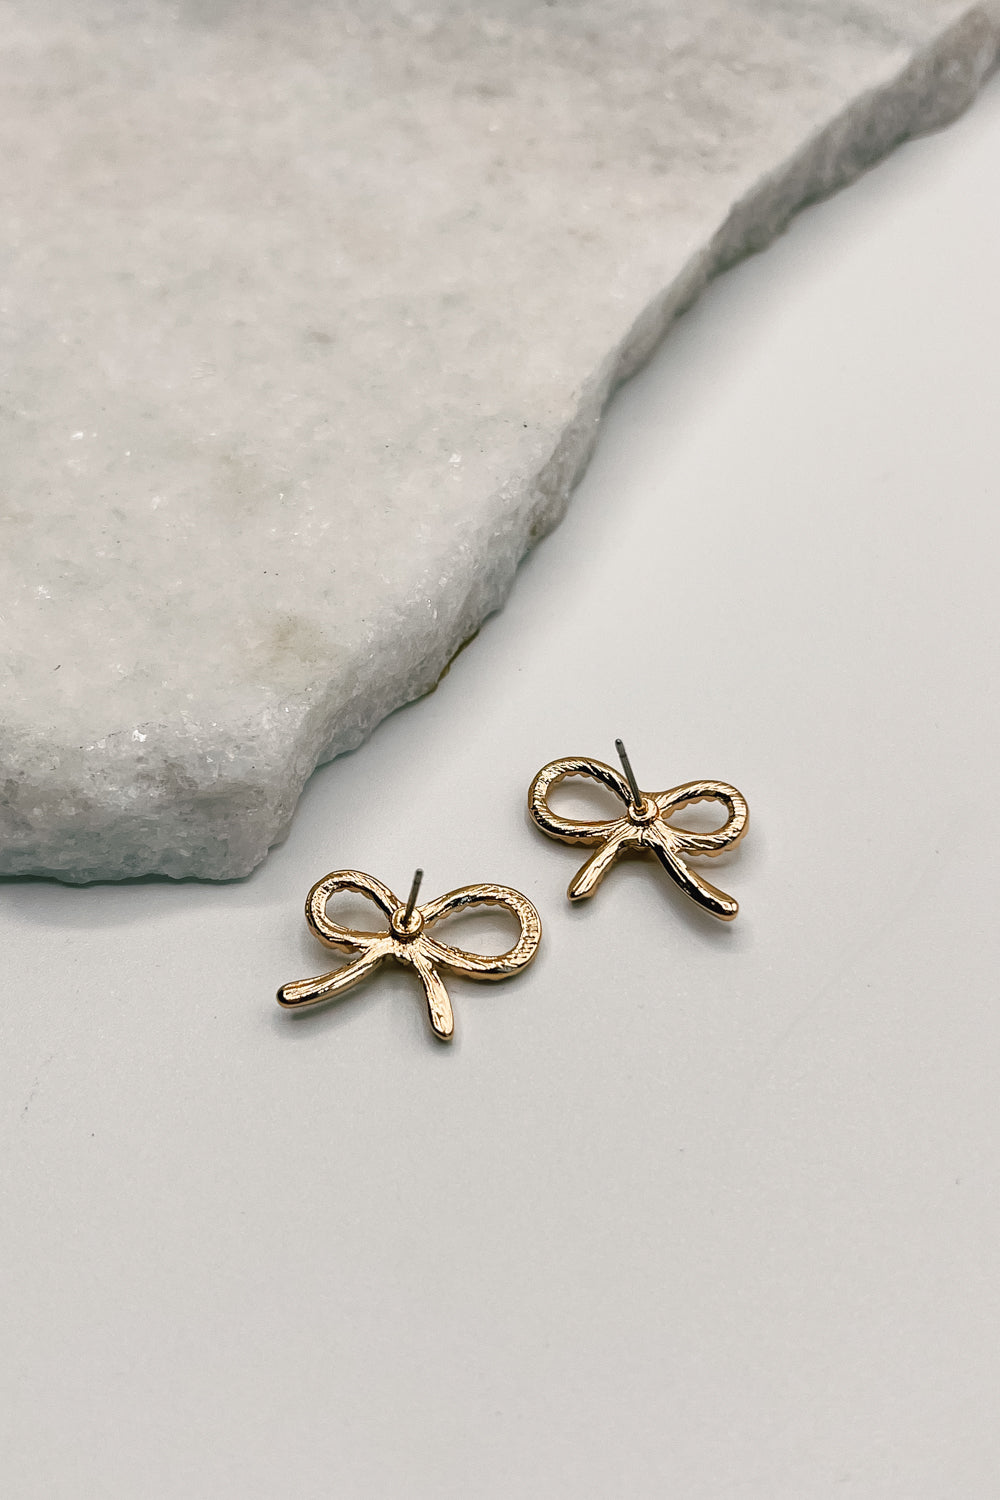 Close up of back of London Gold Ribbed Bow Earrings, gold ribbed bow shaped stud earrings.